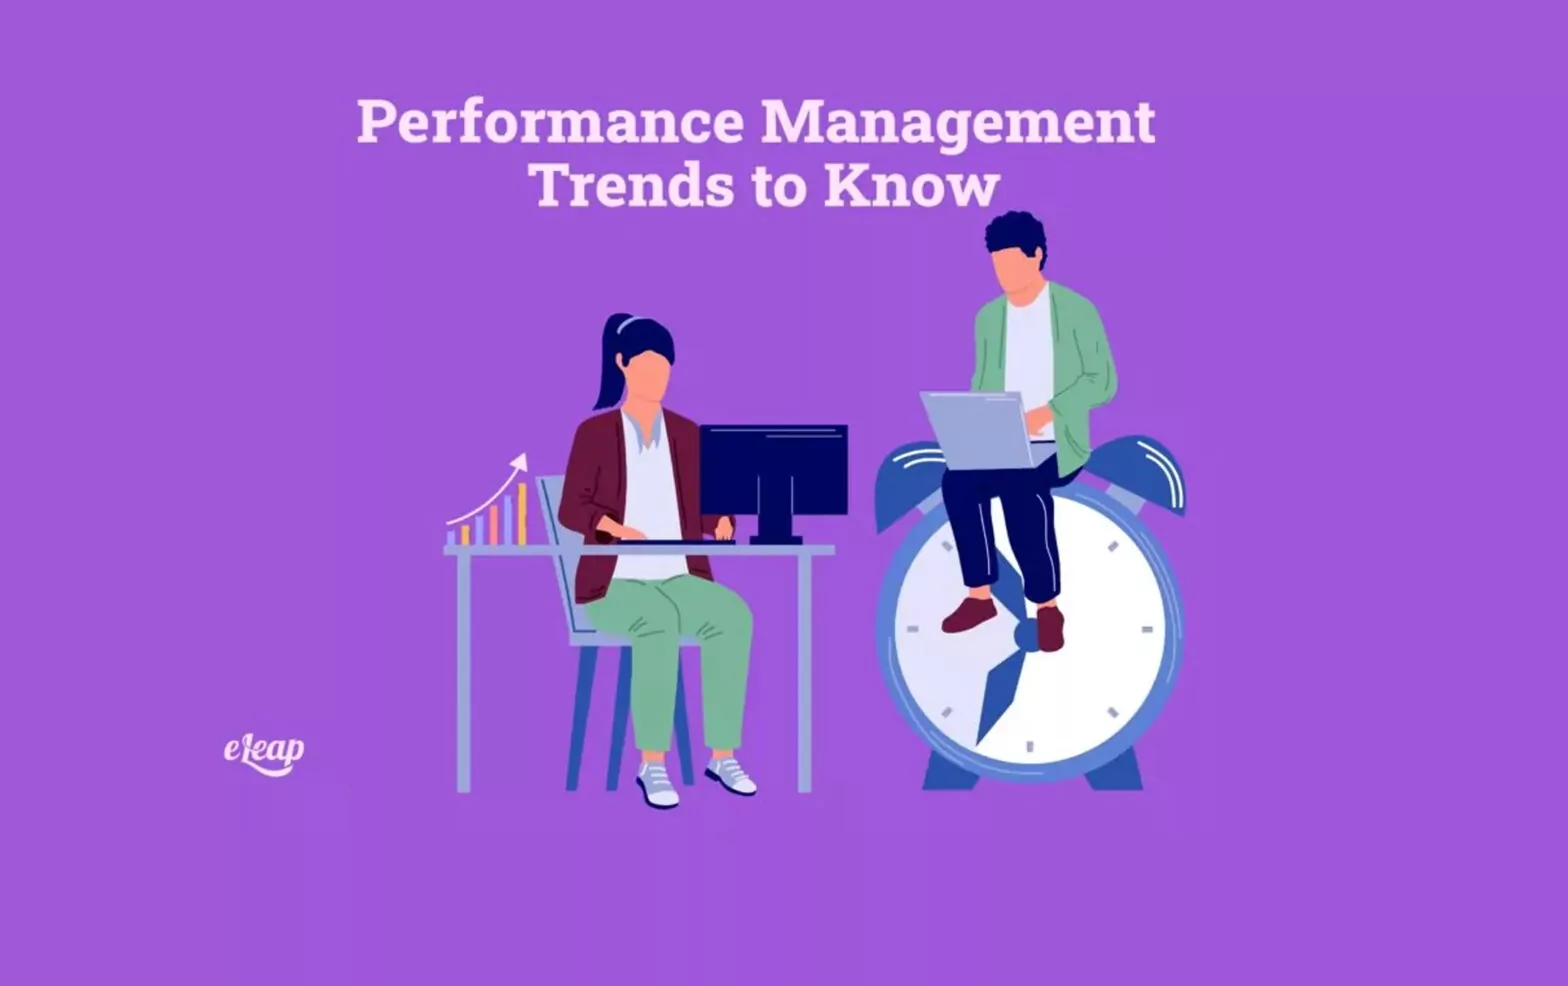 Performance Management Trends to Know